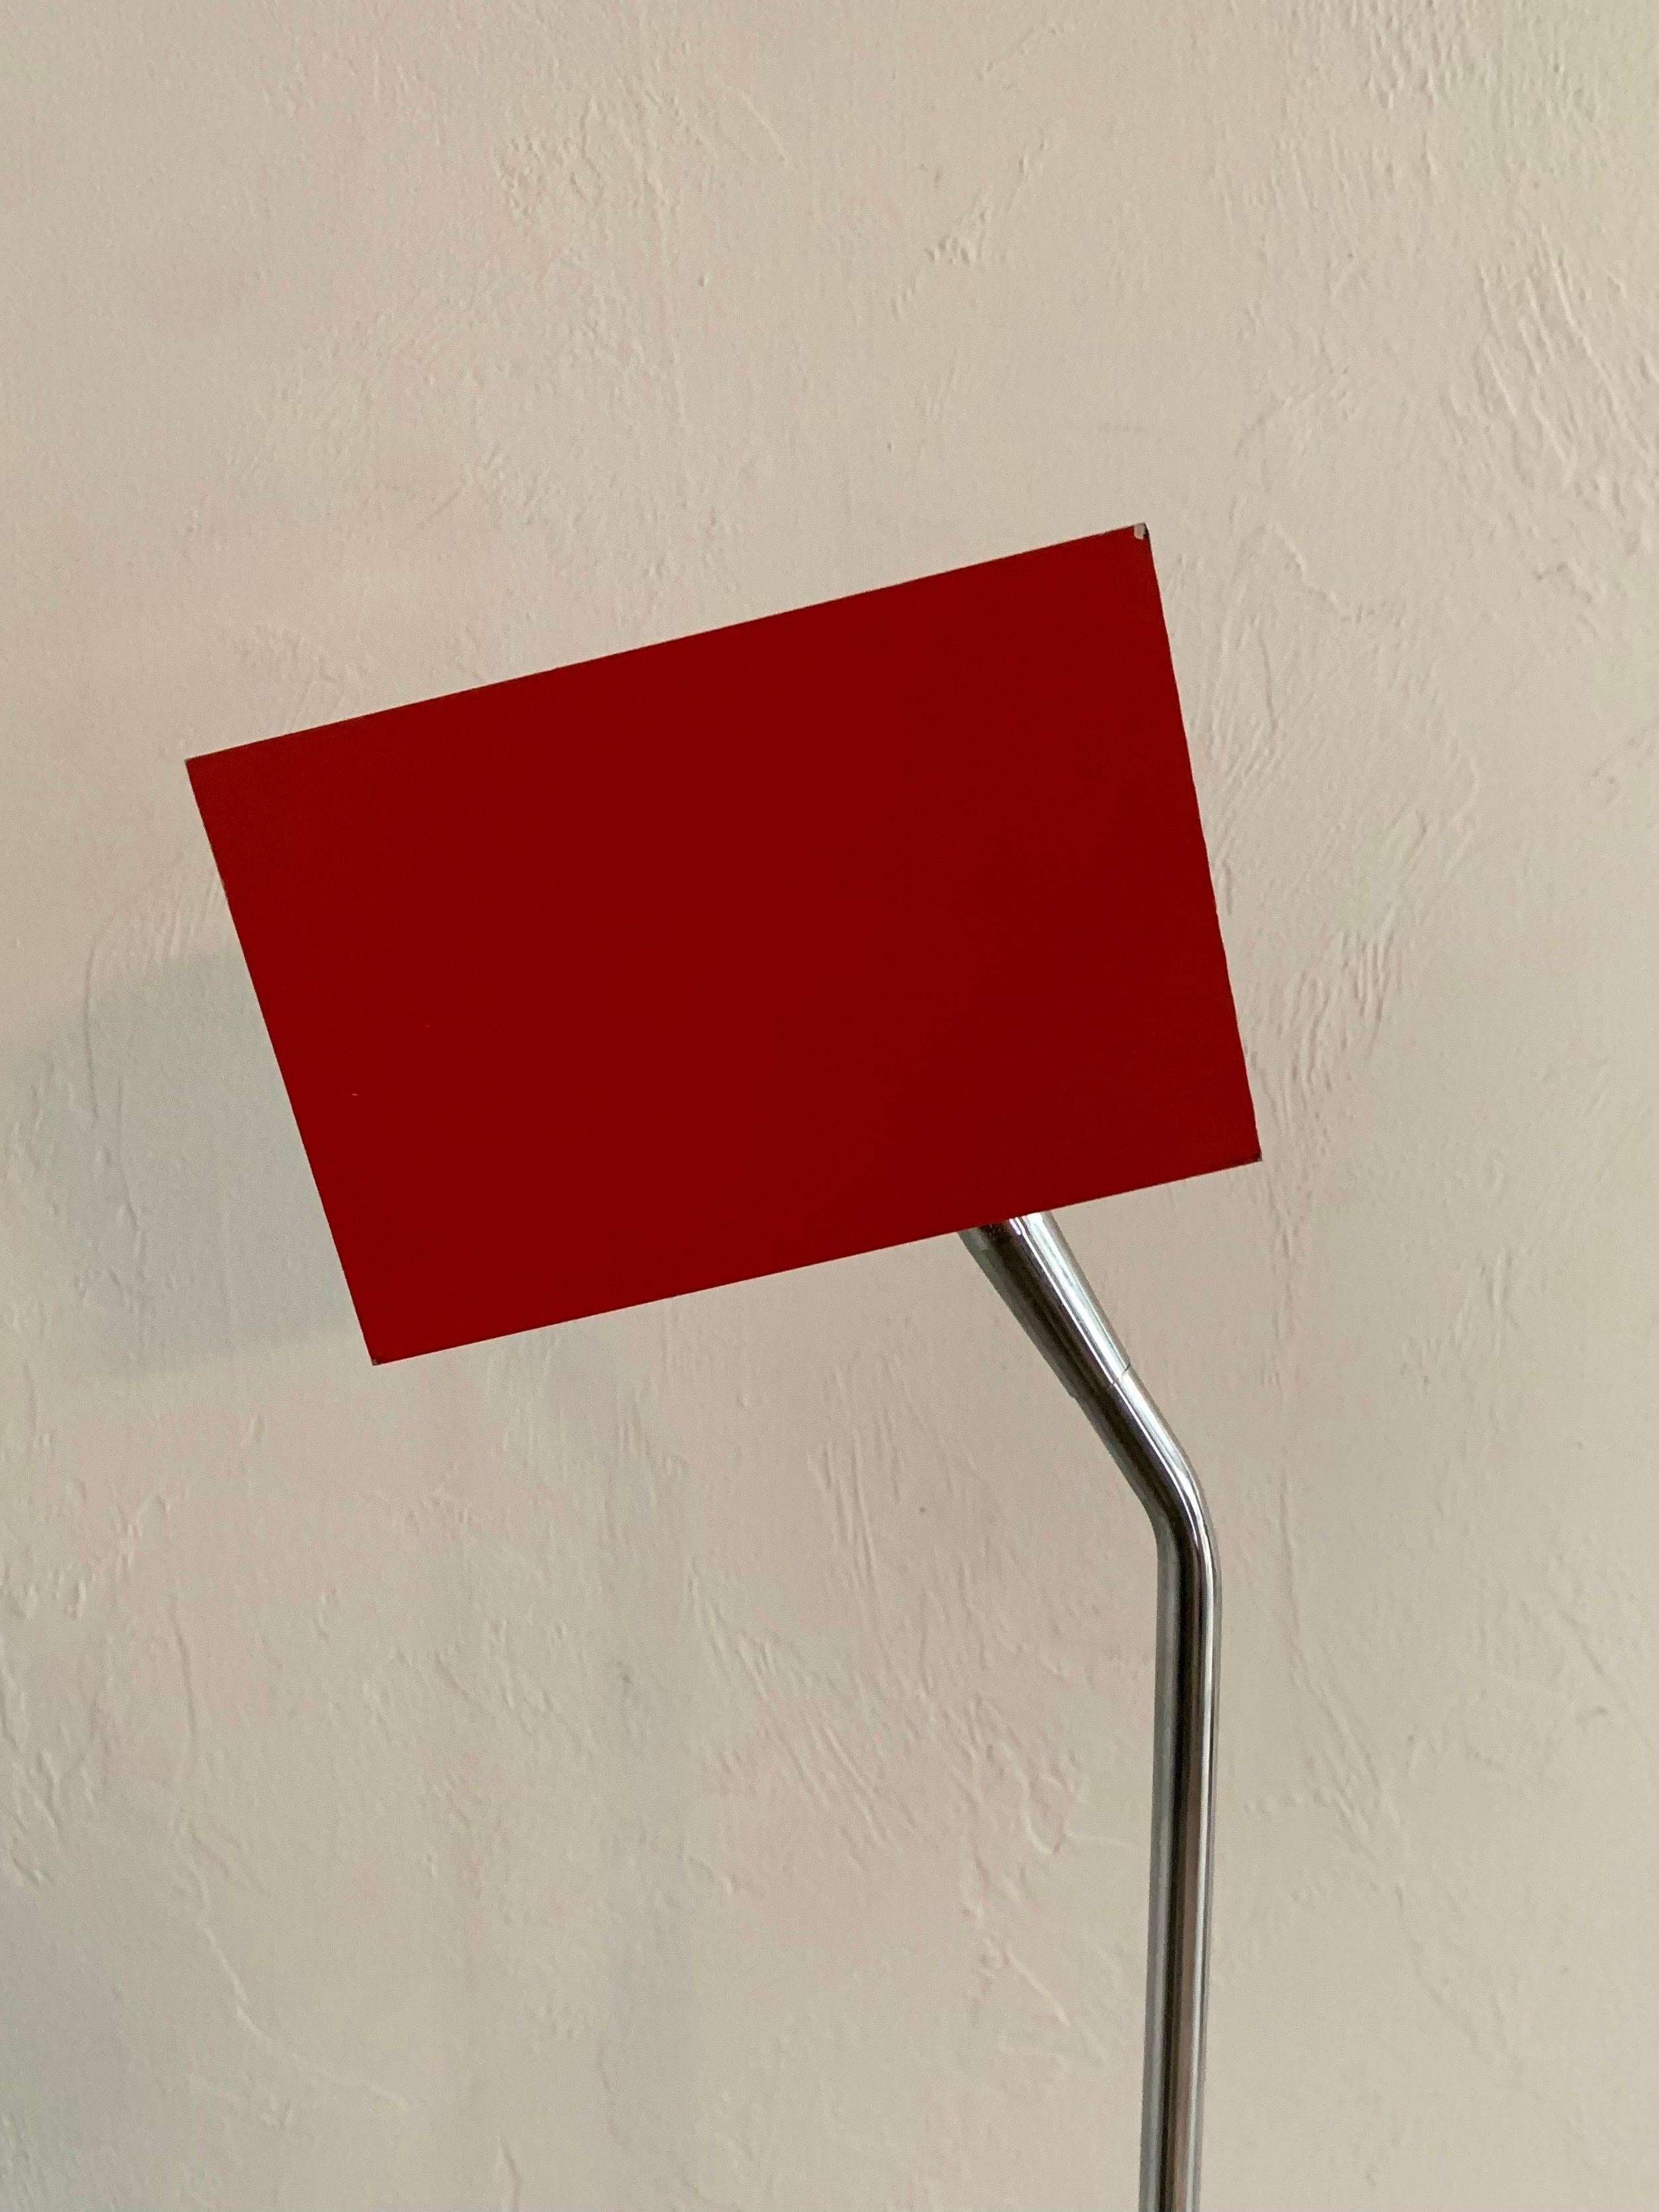 Sonneman for Kovacs Steel and Chrome Cubist Floor Lamp in Red, 1950s In Good Condition For Sale In Boynton Beach, FL